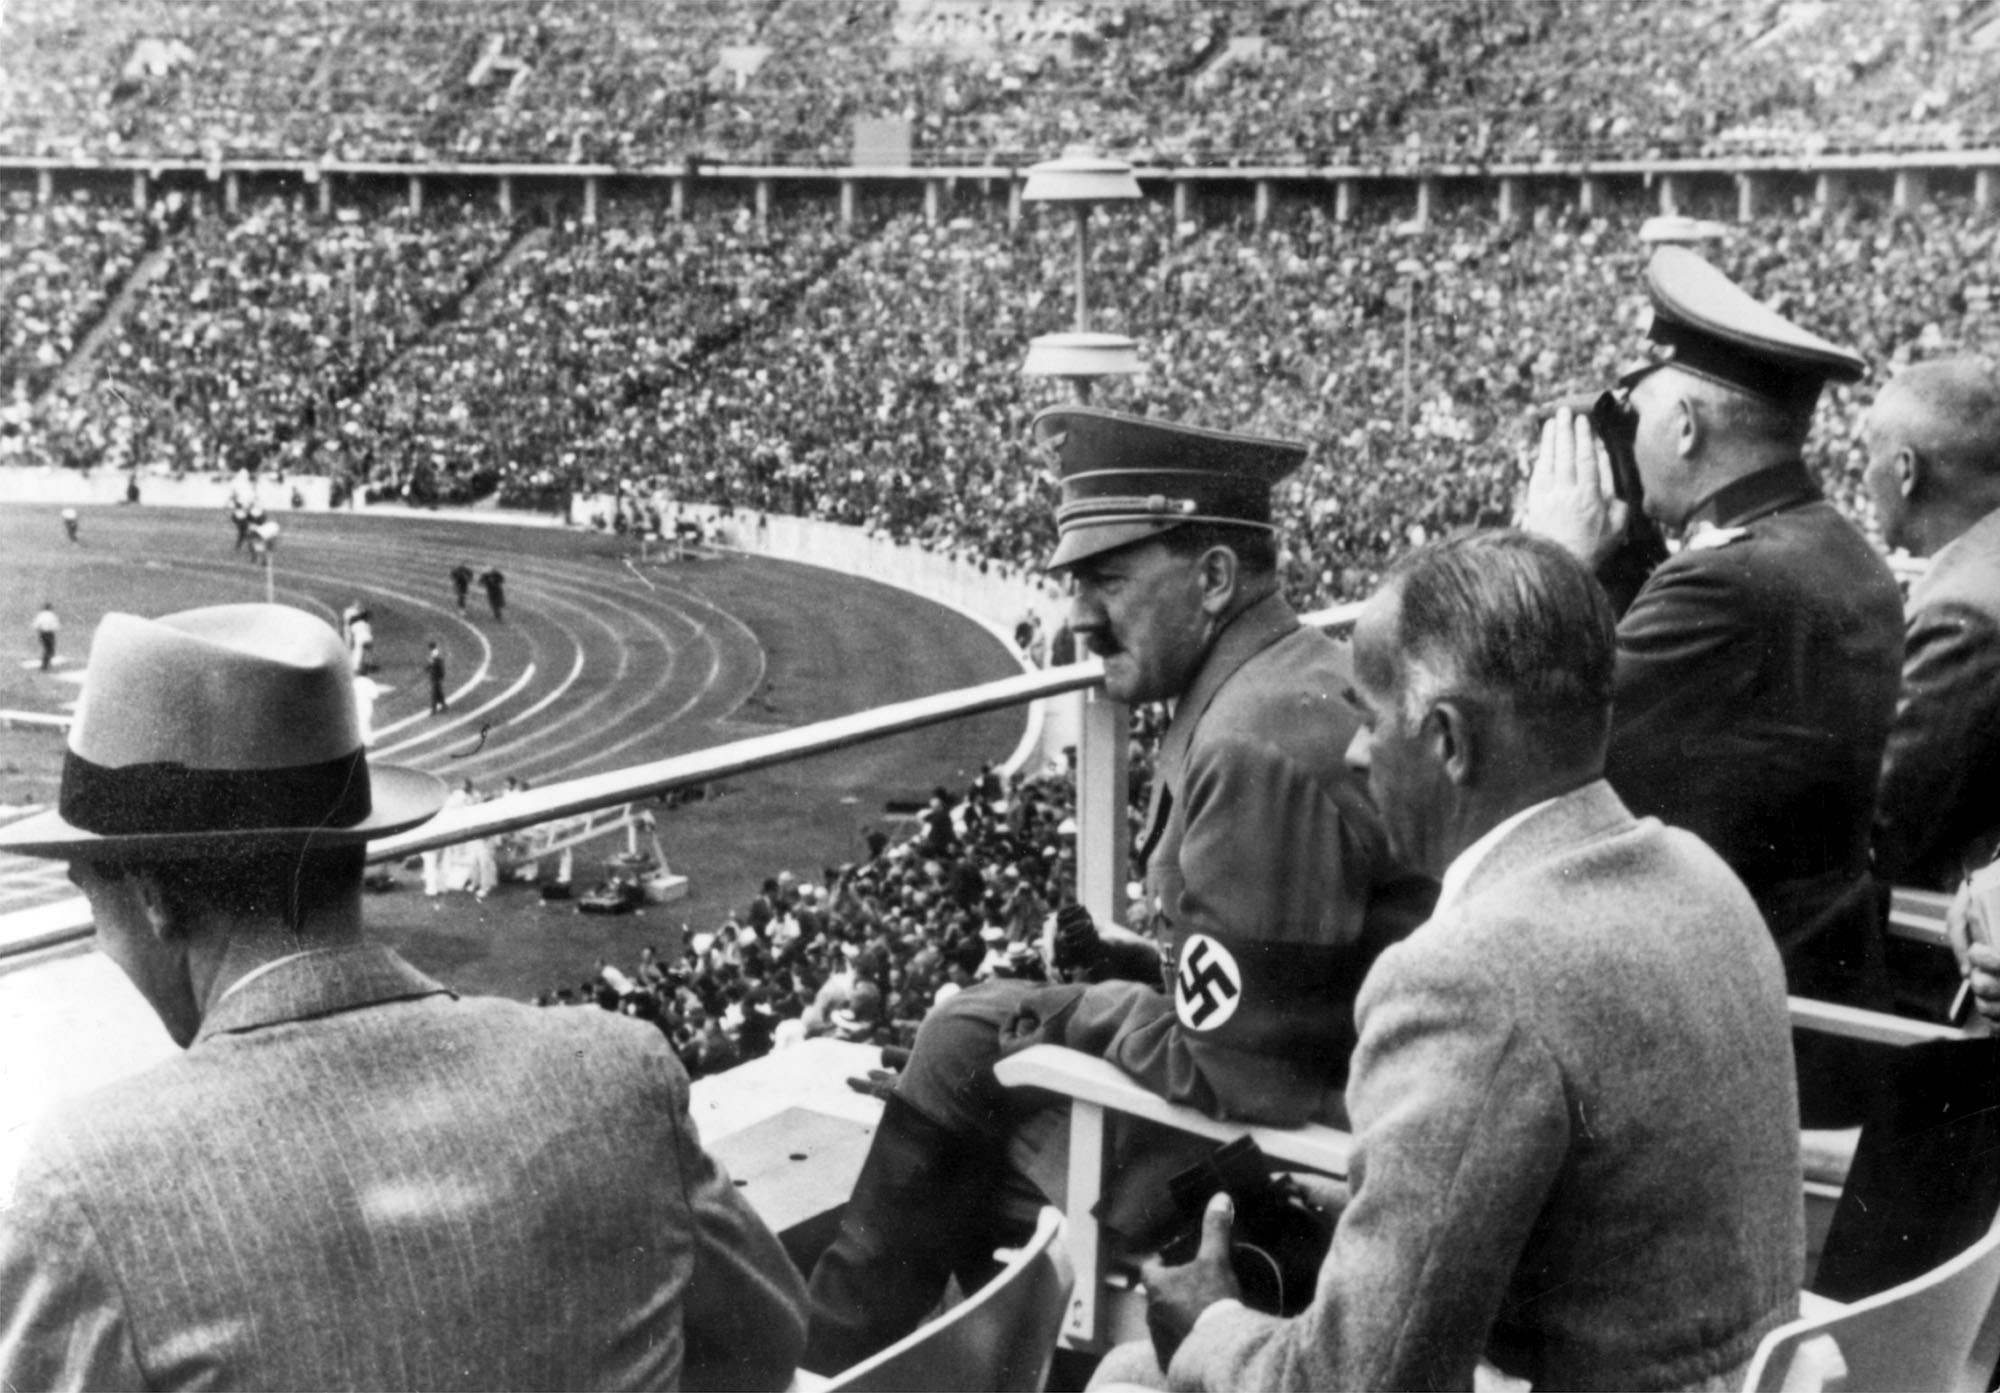 Fuhrer hitler and nazi regime watch the 1936 olympic games and first torch relay